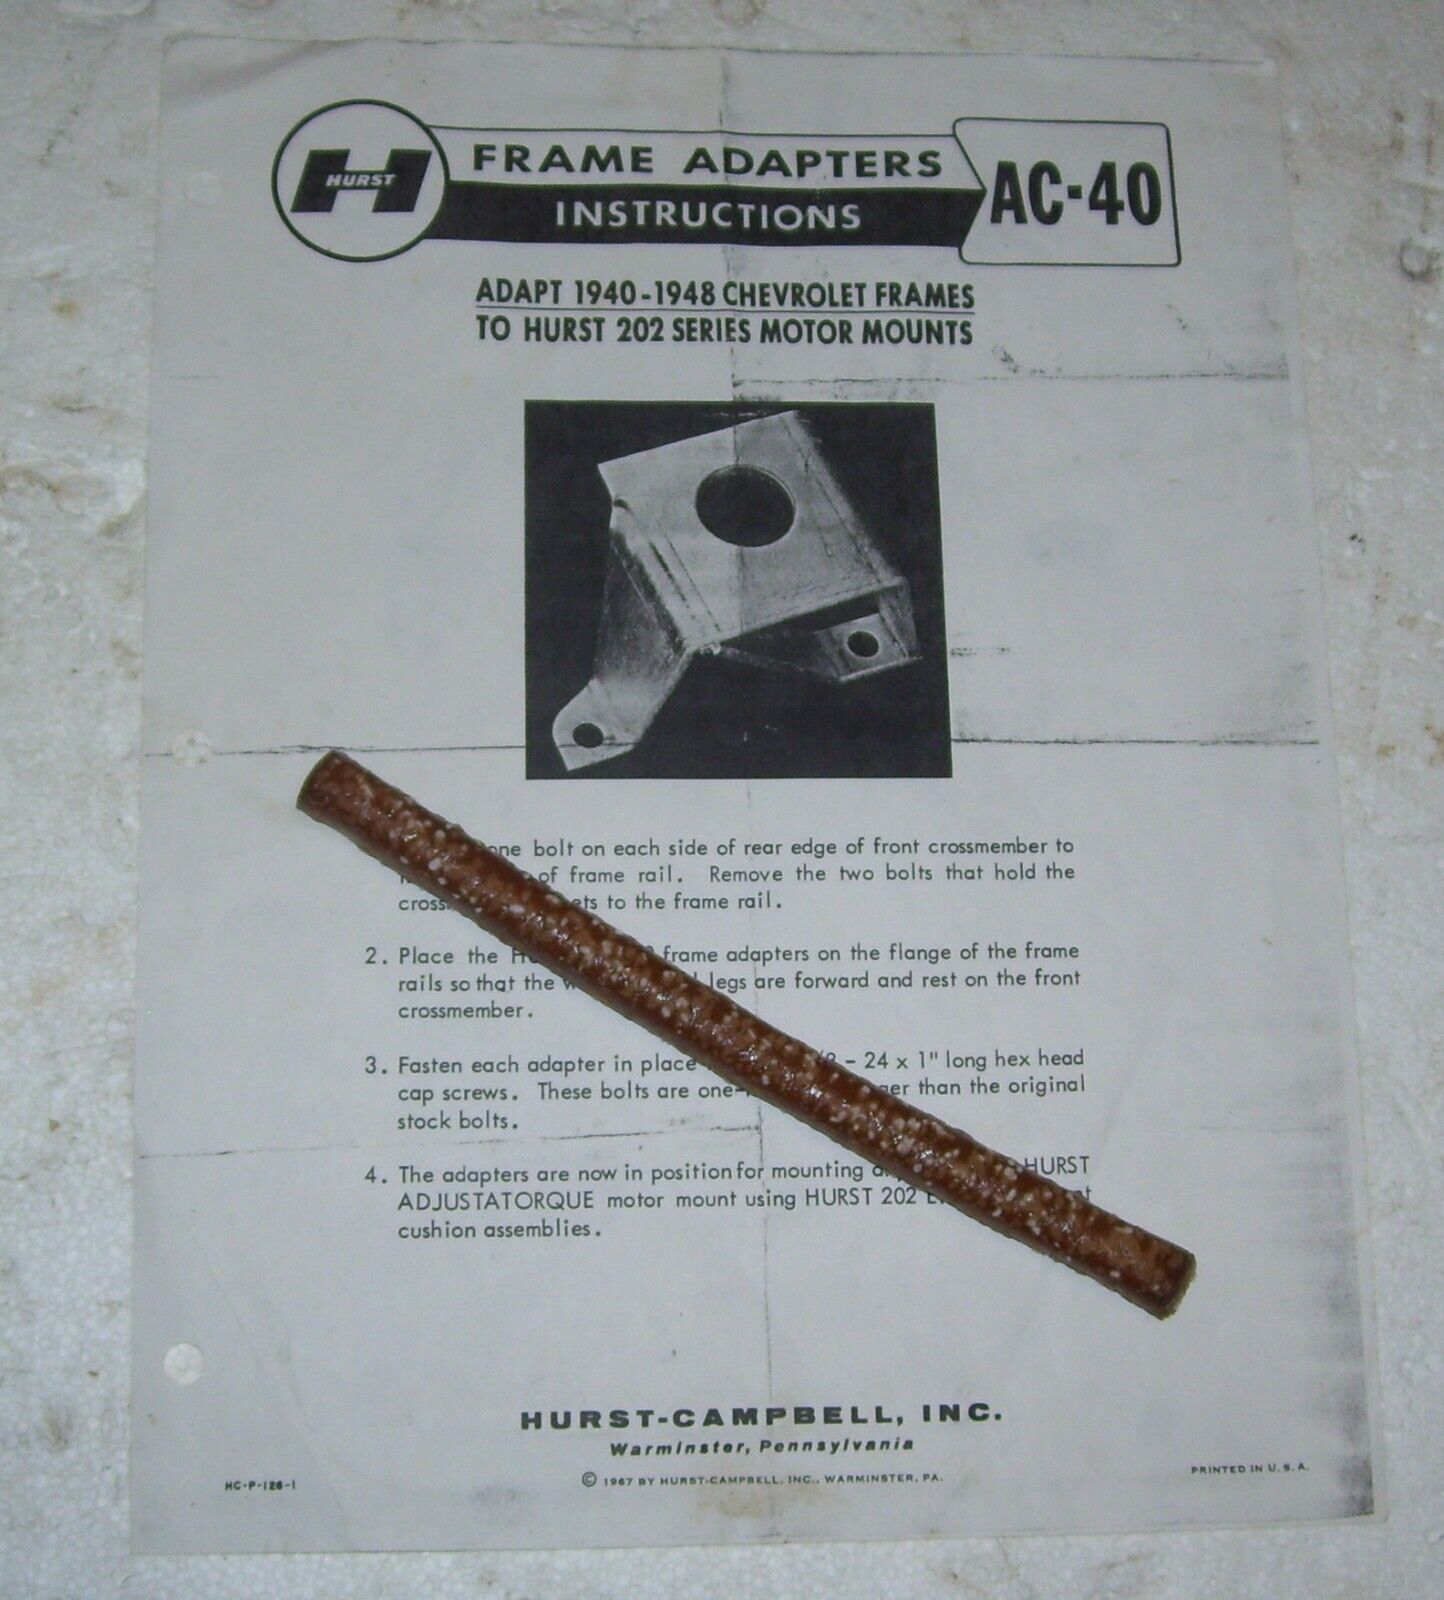 HURST FRAME ADAPTER AC-40 SHOWING HOW TO USE  IN 40 TO 48 CHEVROLET